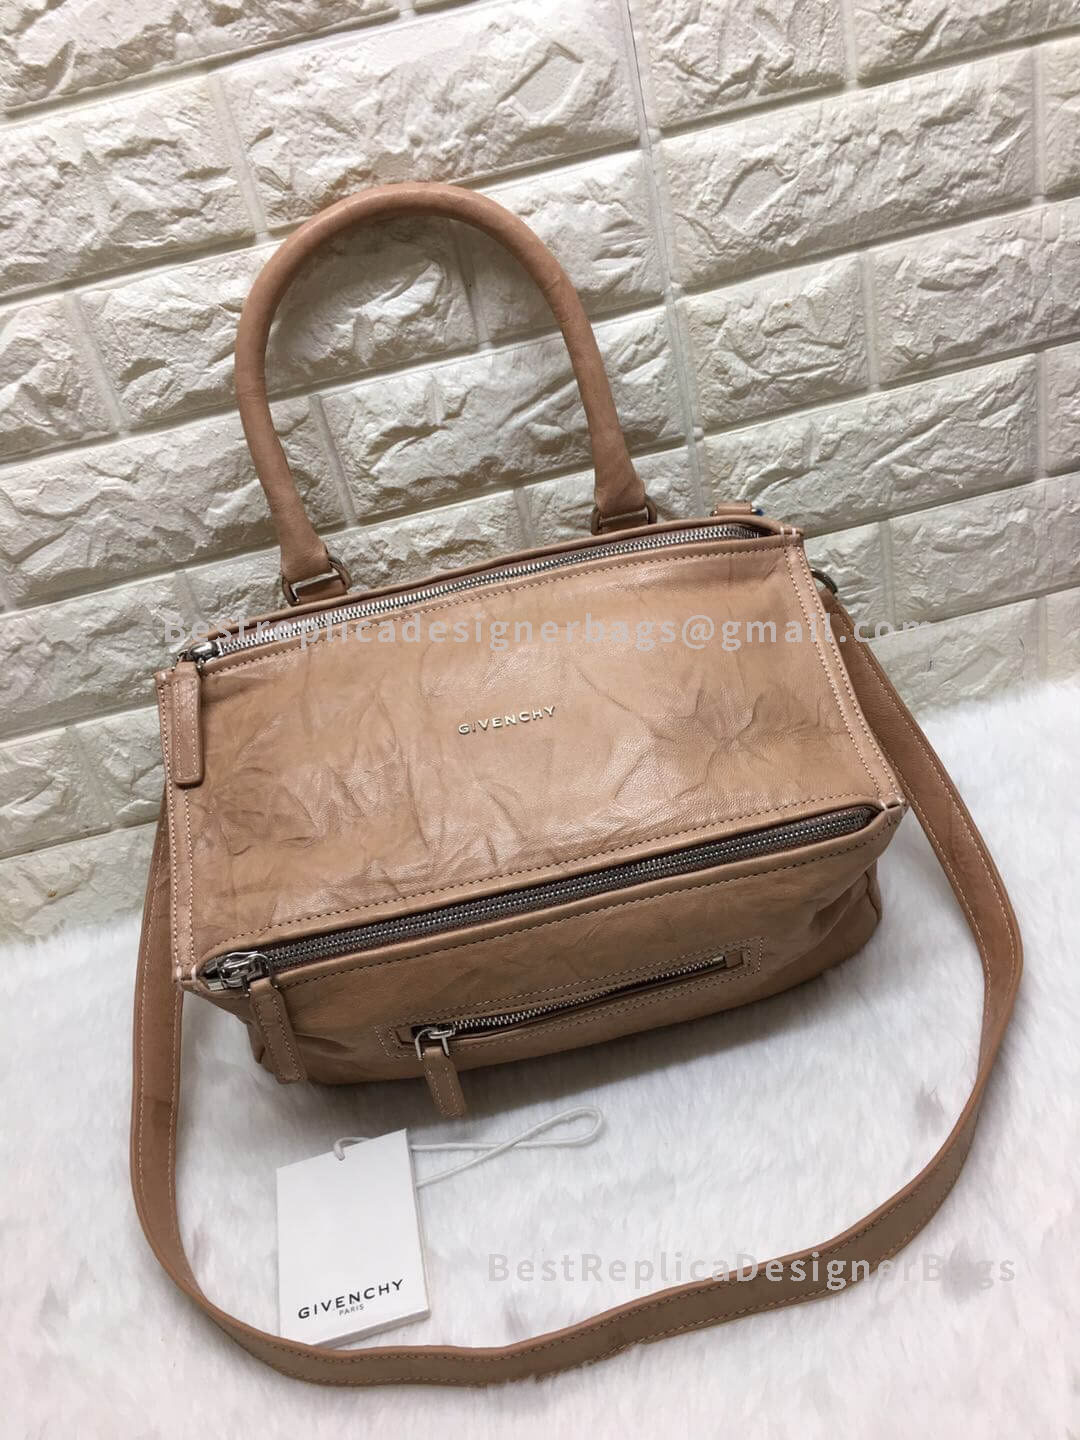 Givenchy Small Pandora Bag In Aged Leather Nude SHW 1-28608 - Best ...